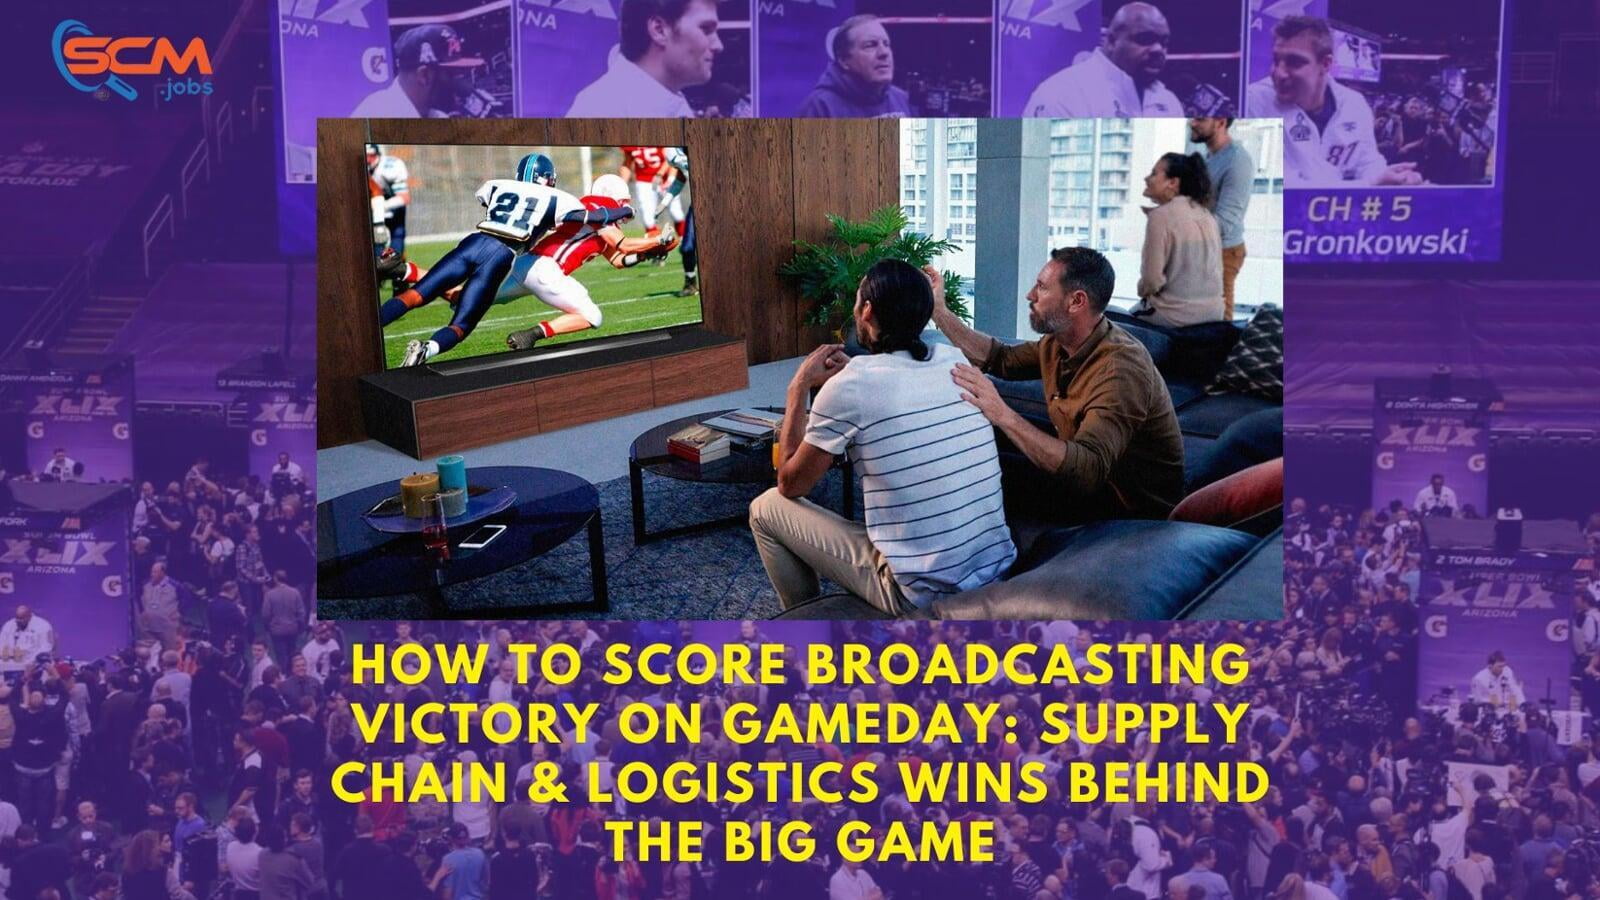 How to Score Broadcasting Victory On Gameday: Supply Chain & Logistics Wins Behind the Big Game